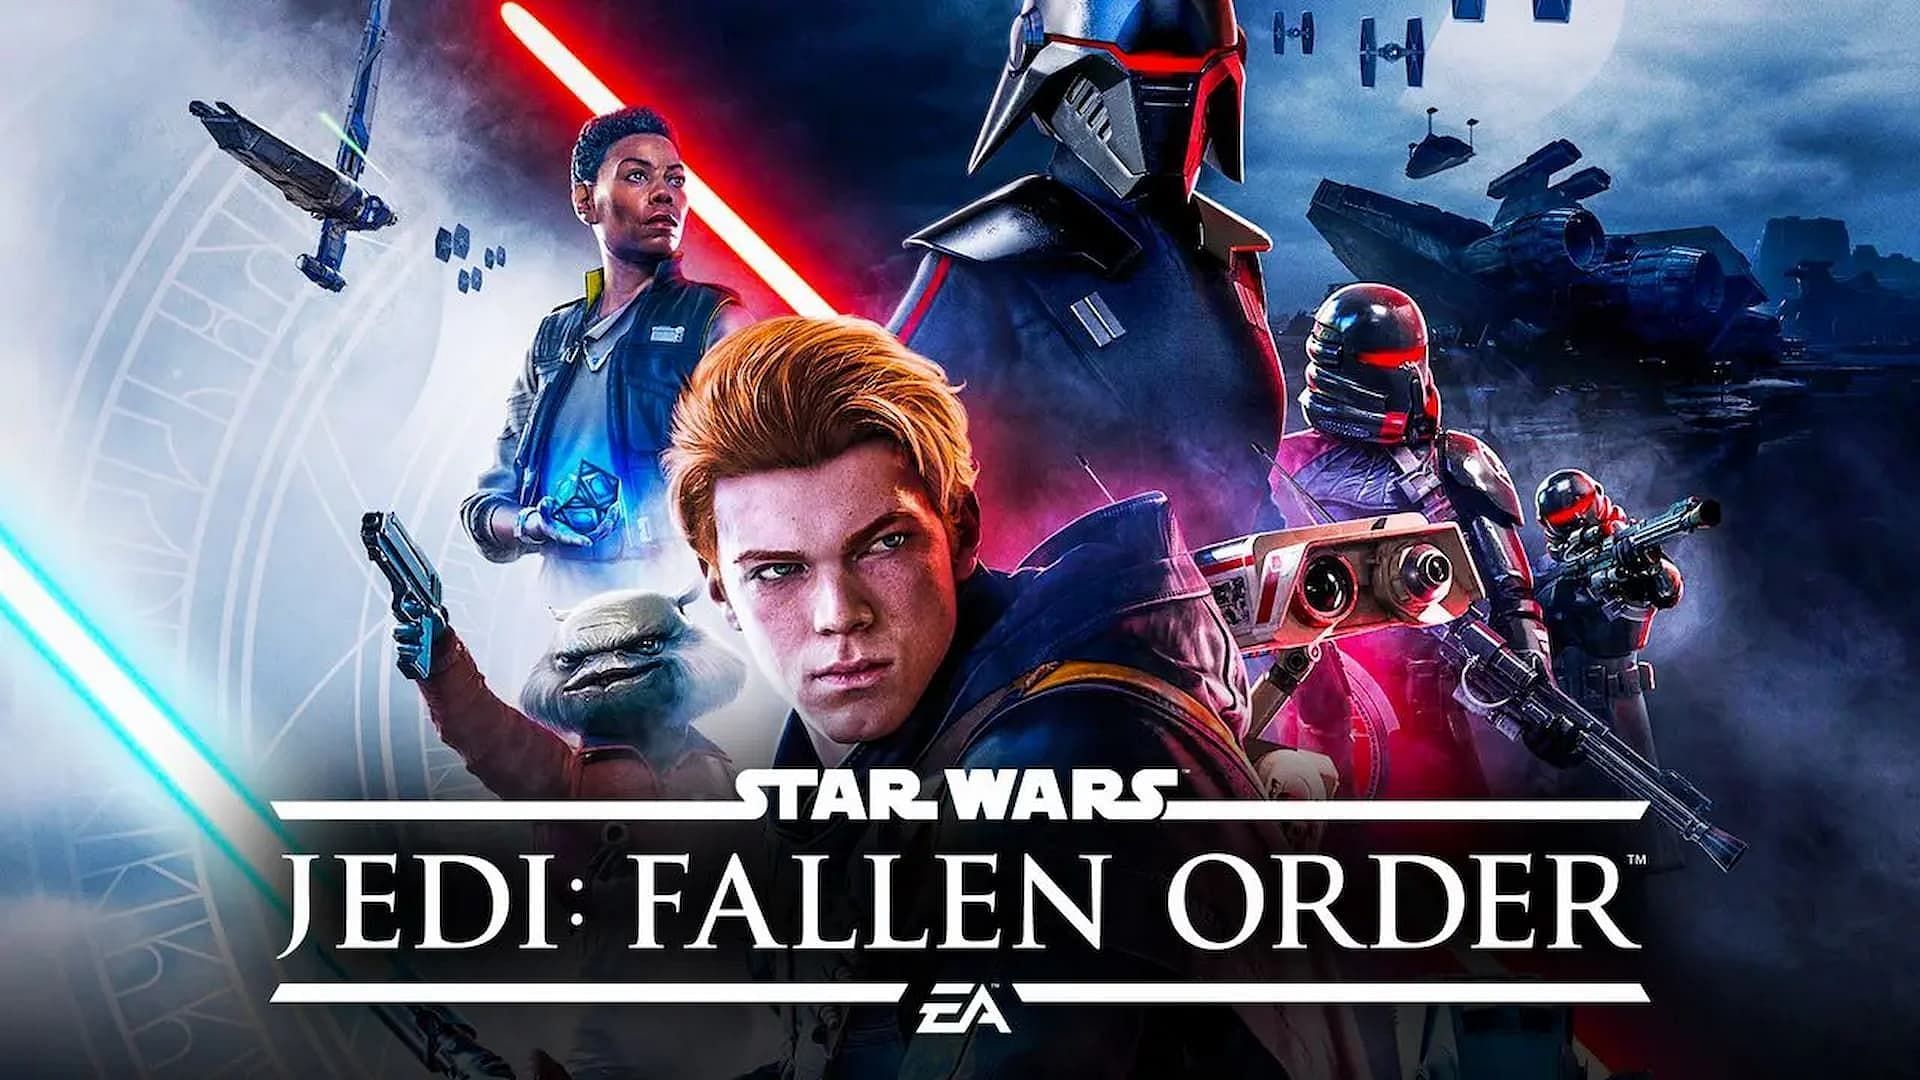 Star Wars Jedi Fallen Order will potentially be one of the titles to join the PlayStation Plus service in January 2023 (Image via Respawn Entertainment)